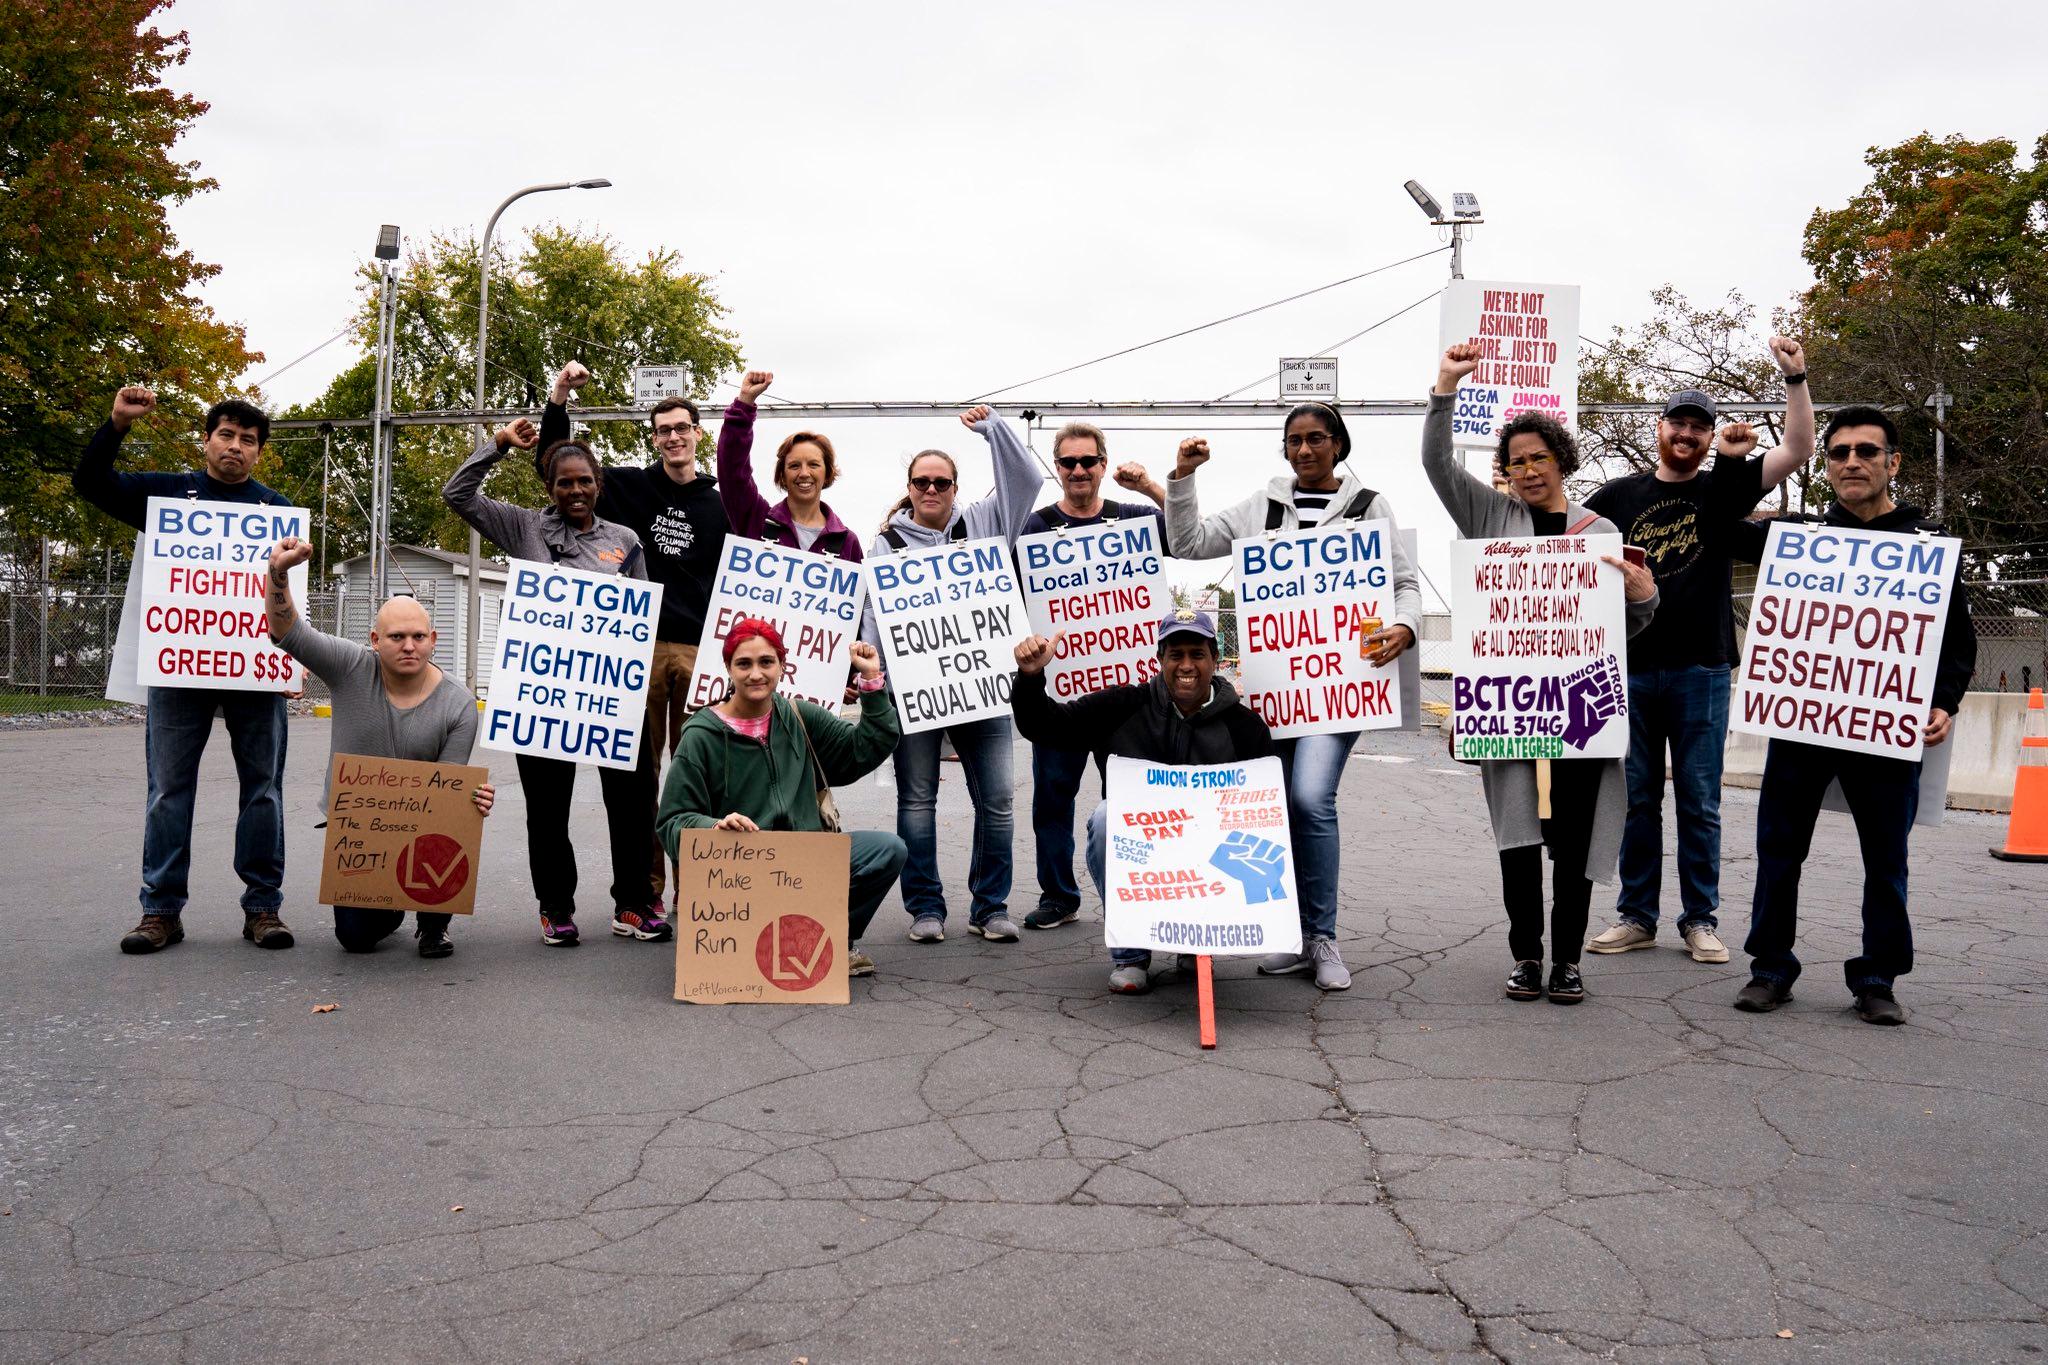 12 people hold signs and hold their fists raised on the Kellogg's picket line.